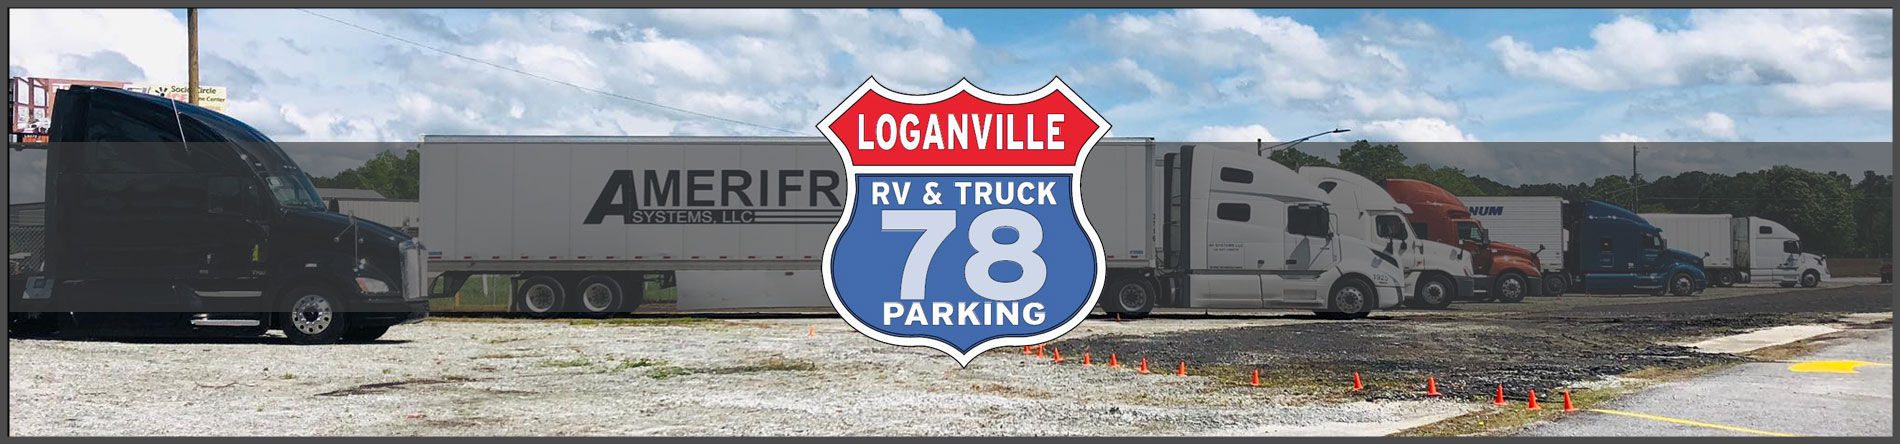 Services & Products Loganville RV & Truck Parking in Loganville GA